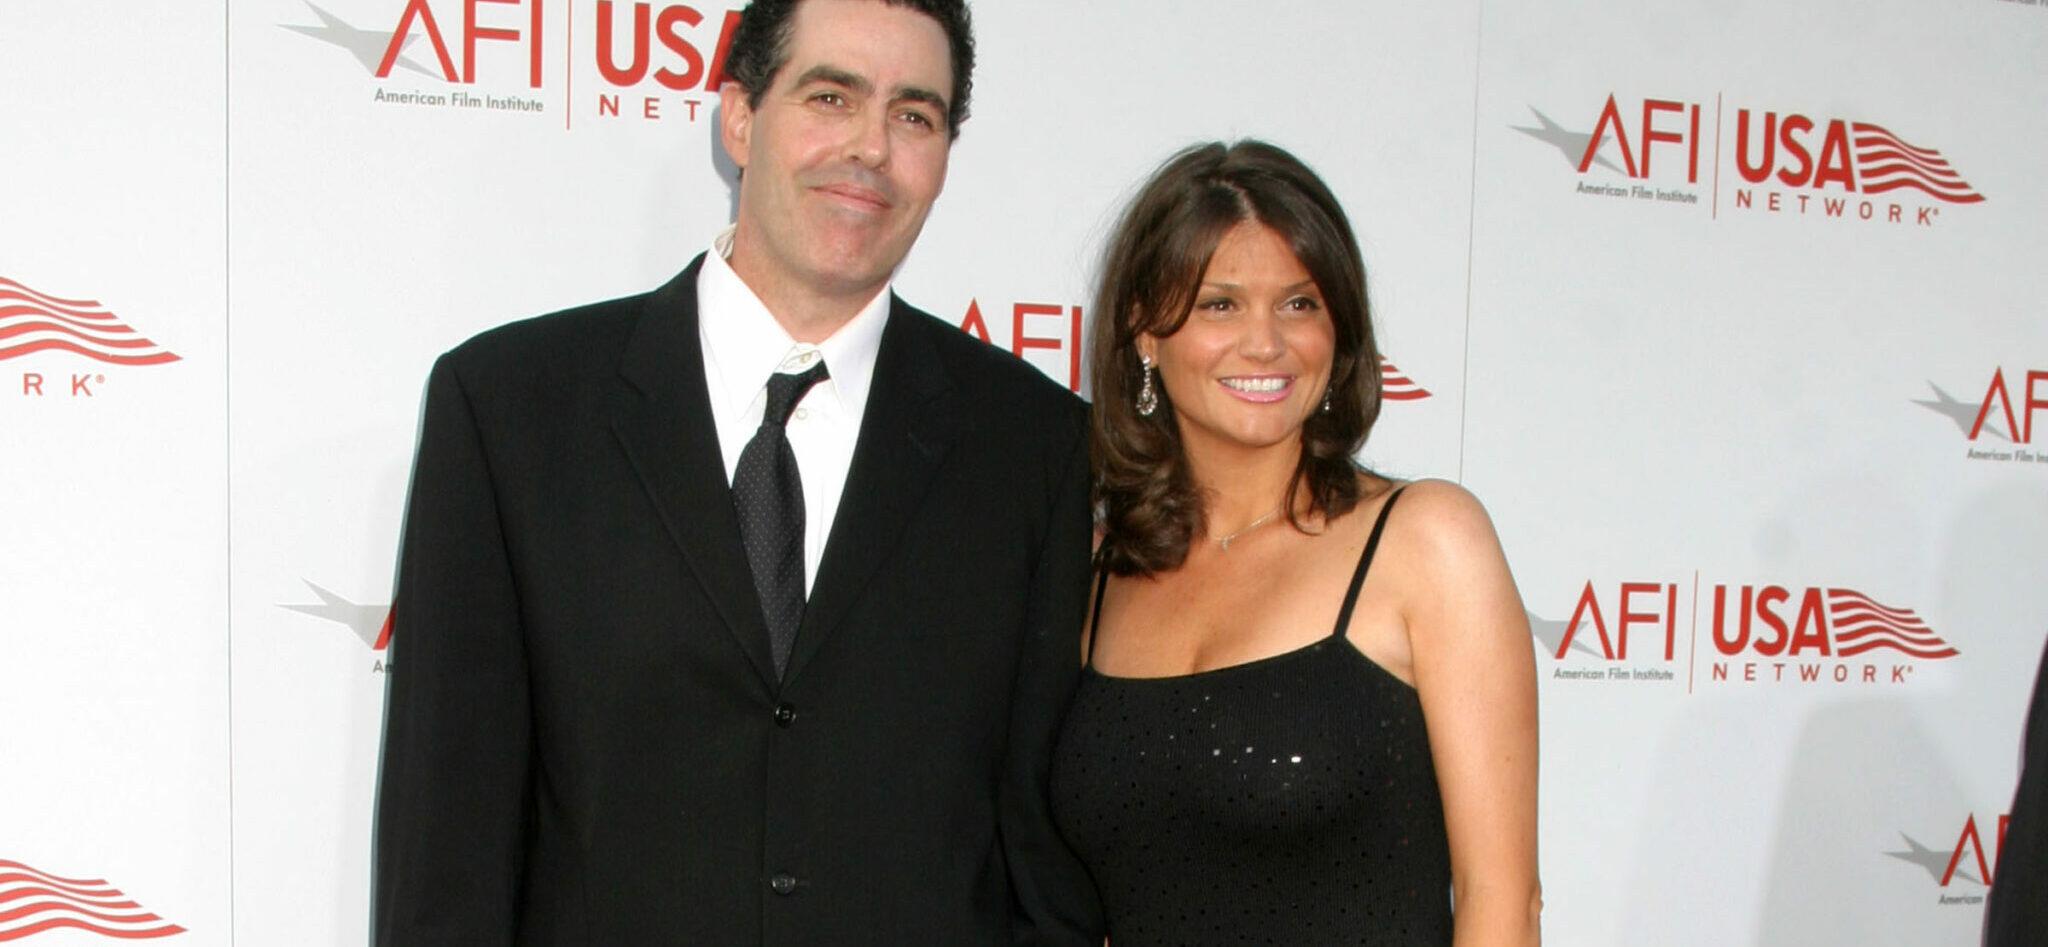 Adam Carolla's Ex-Wife Responds To Divorce: I Want Joint Custody Of Our Kids